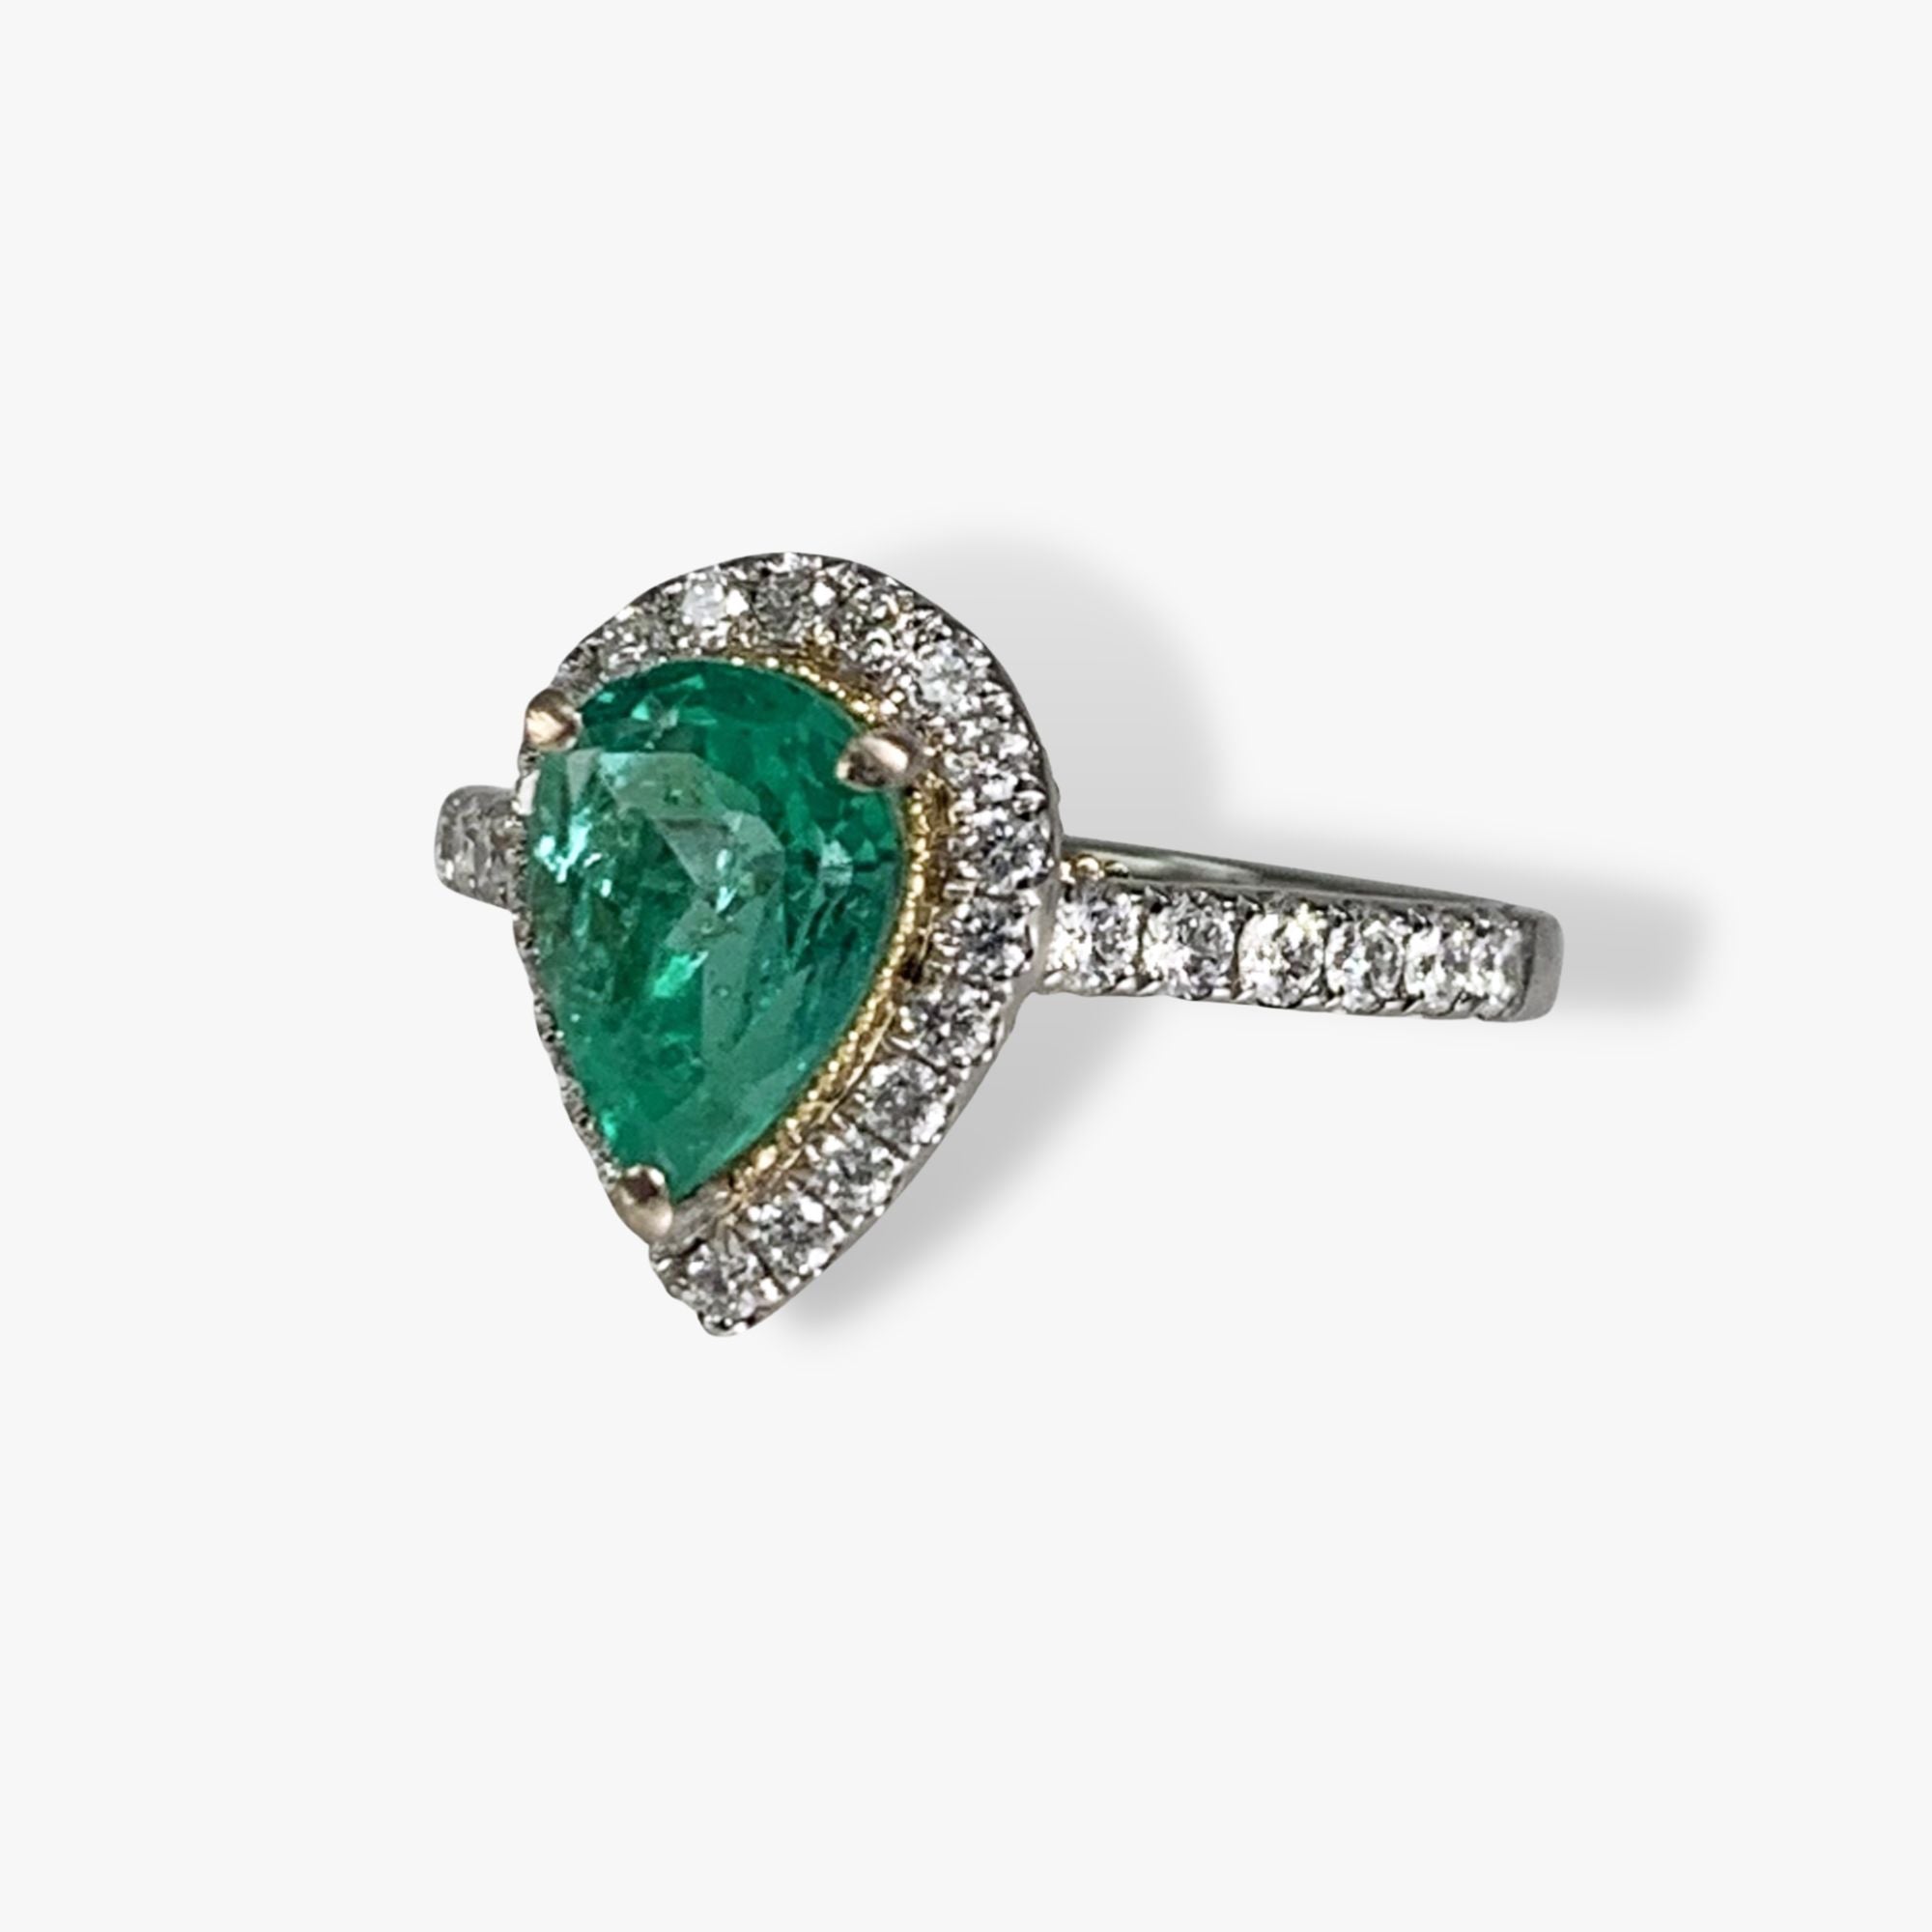 18k White Gold Pear-Shaped Emerald Diamond Halo Ring Side View